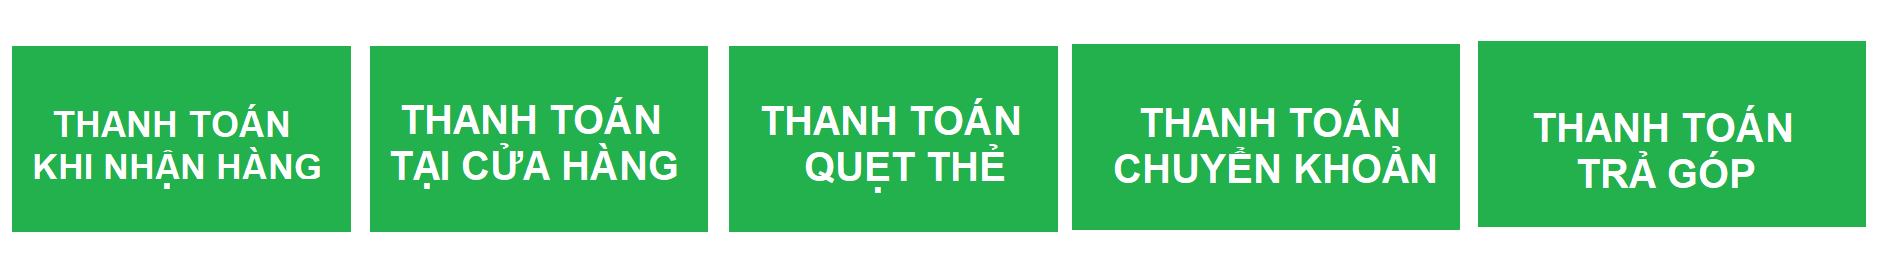 thanh-toan-1638587534.png